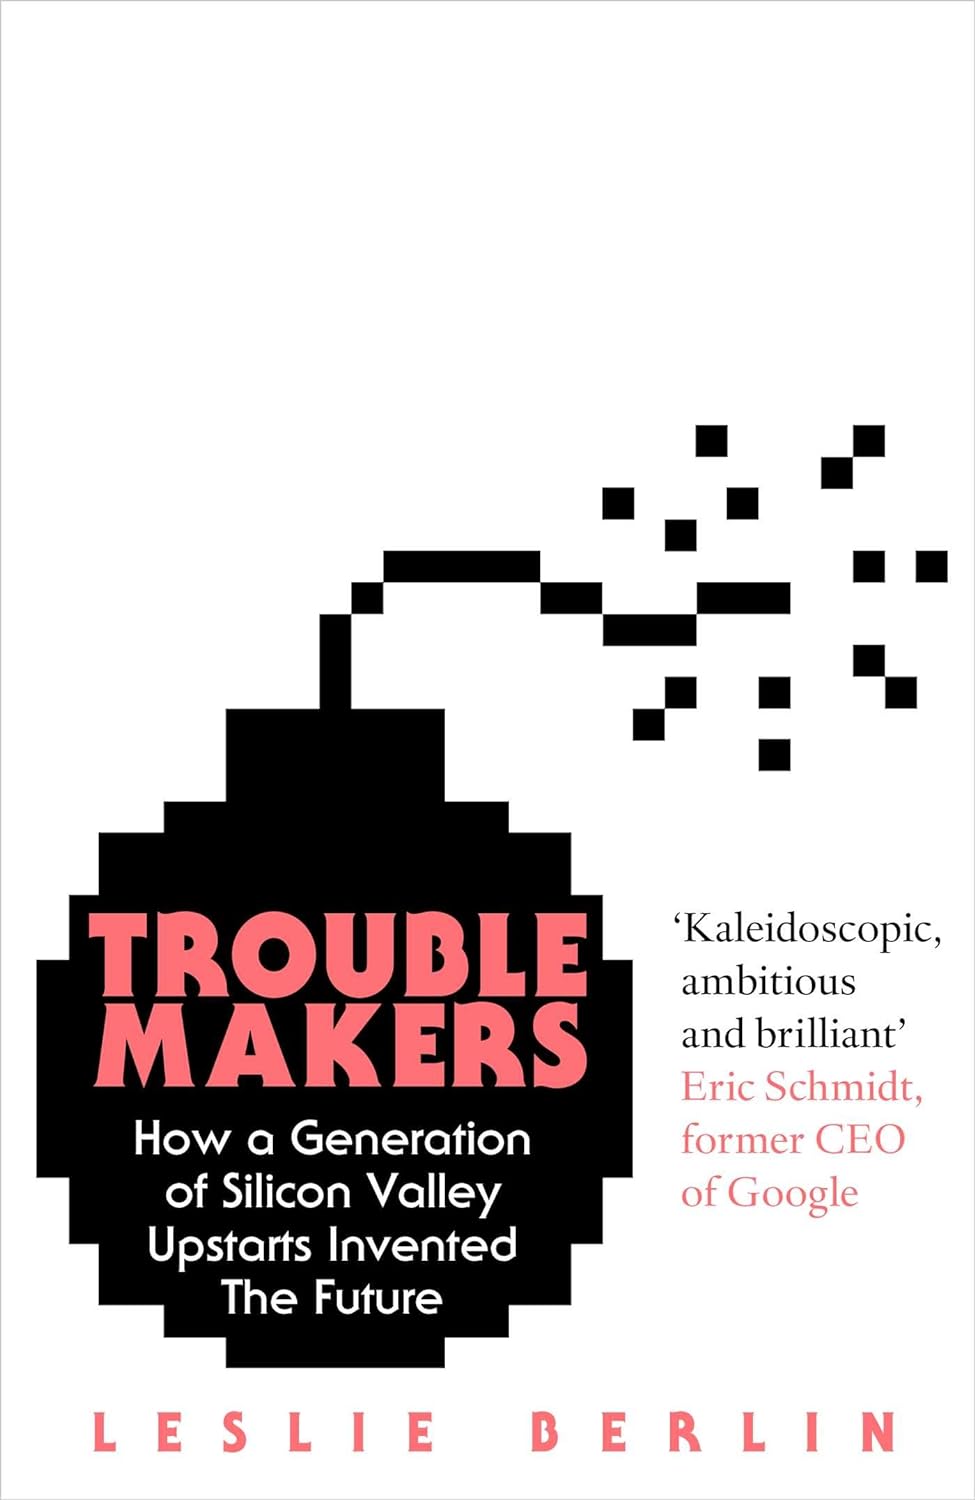 Troublemakers: How a Generation of Silicon Valley Upstarts Invented the Future Paperback